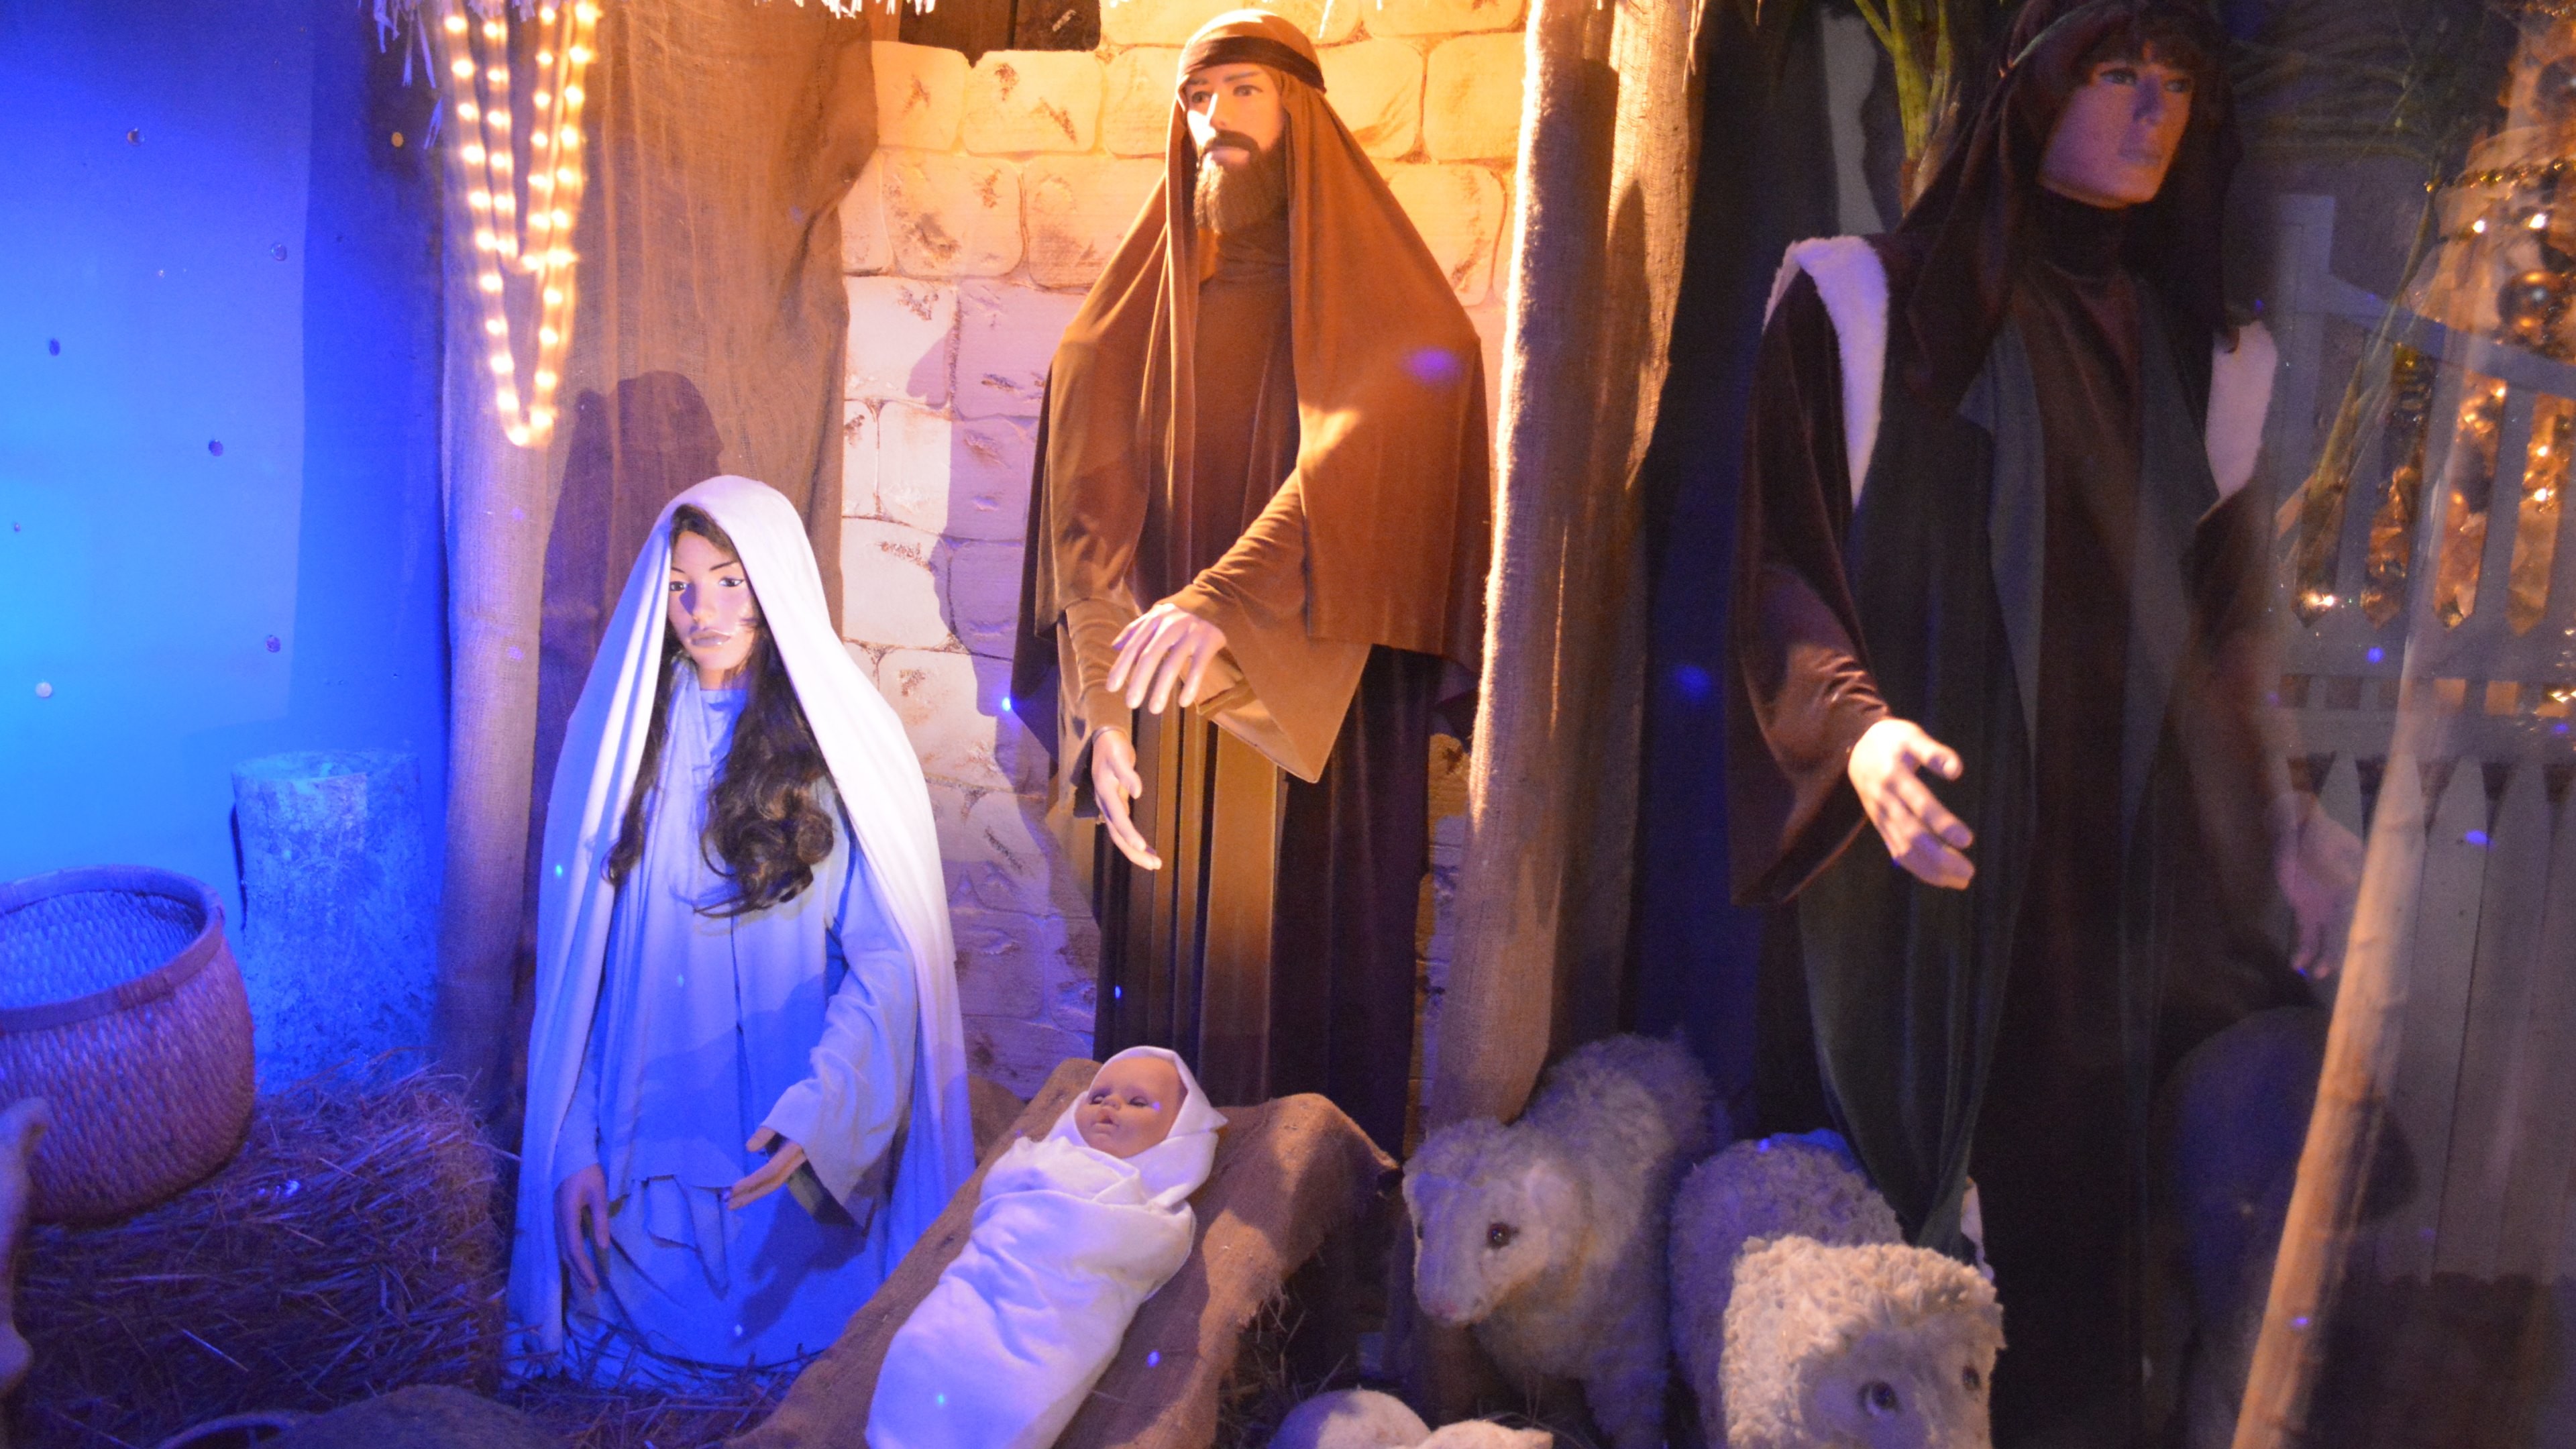 3840x2160 Birth of Jesus scene at every Christmas HD Wallpapers. 4K Wallpapers